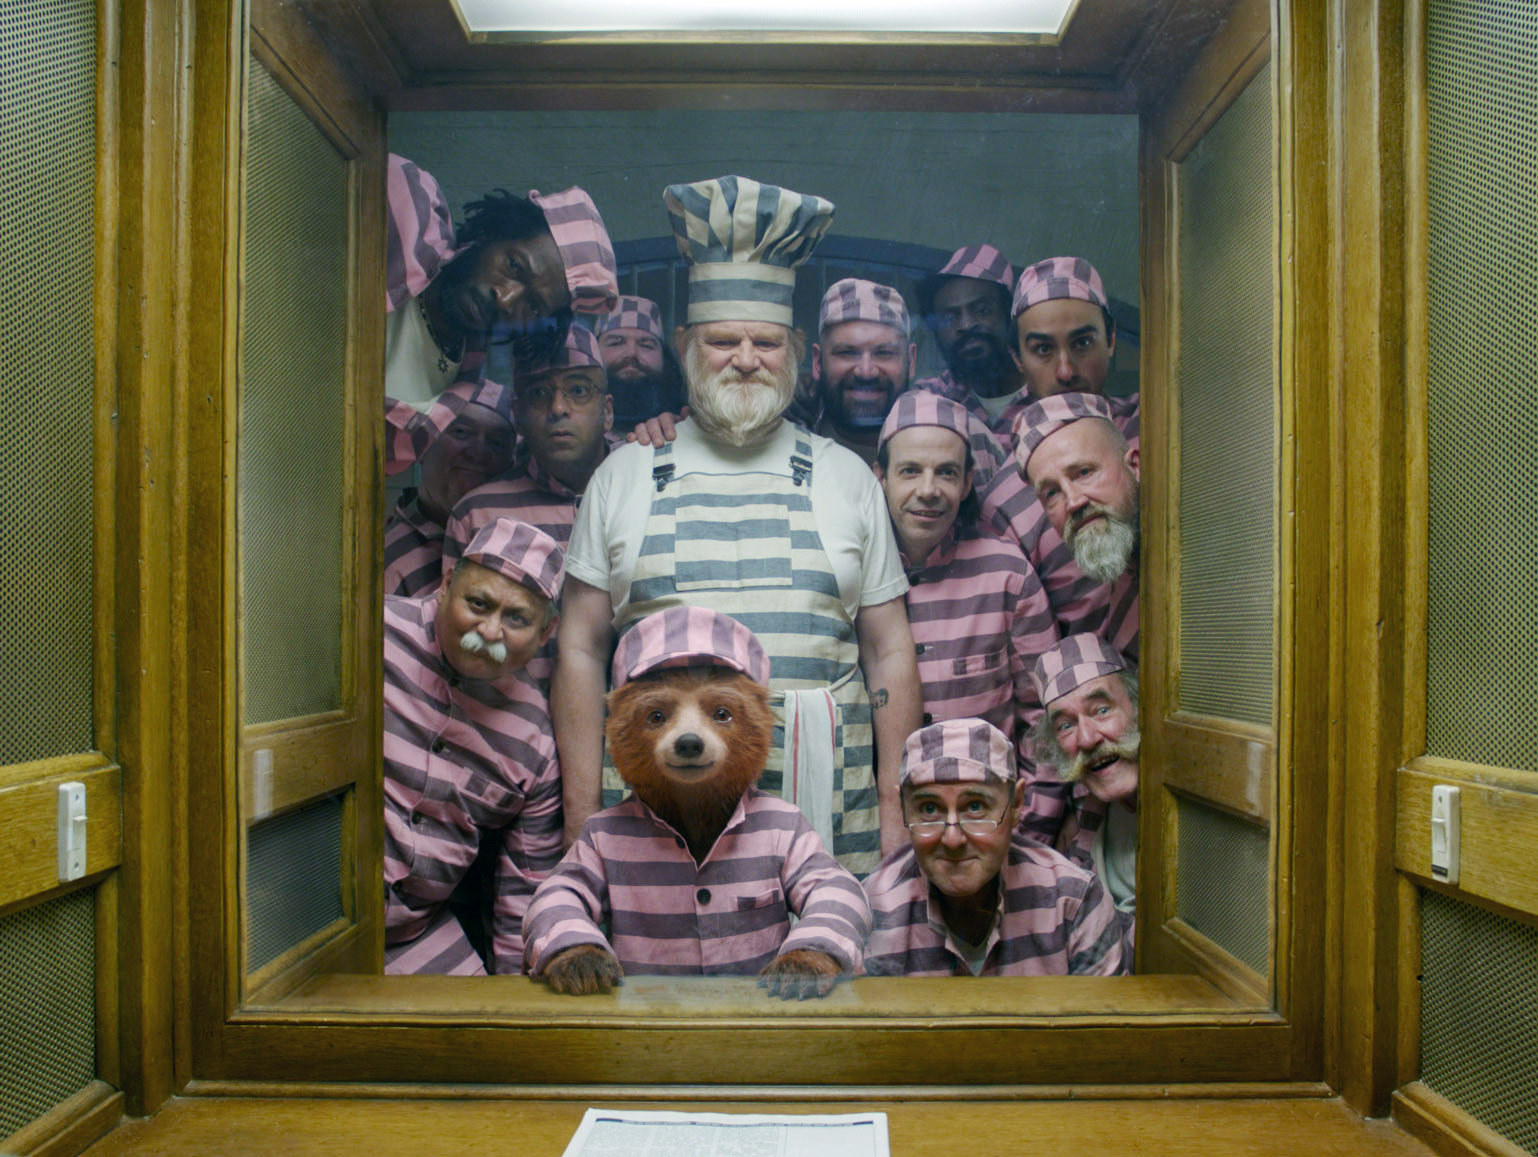 paddington the bear in a black and pink striped convict outfit surrounded by fellow inmates